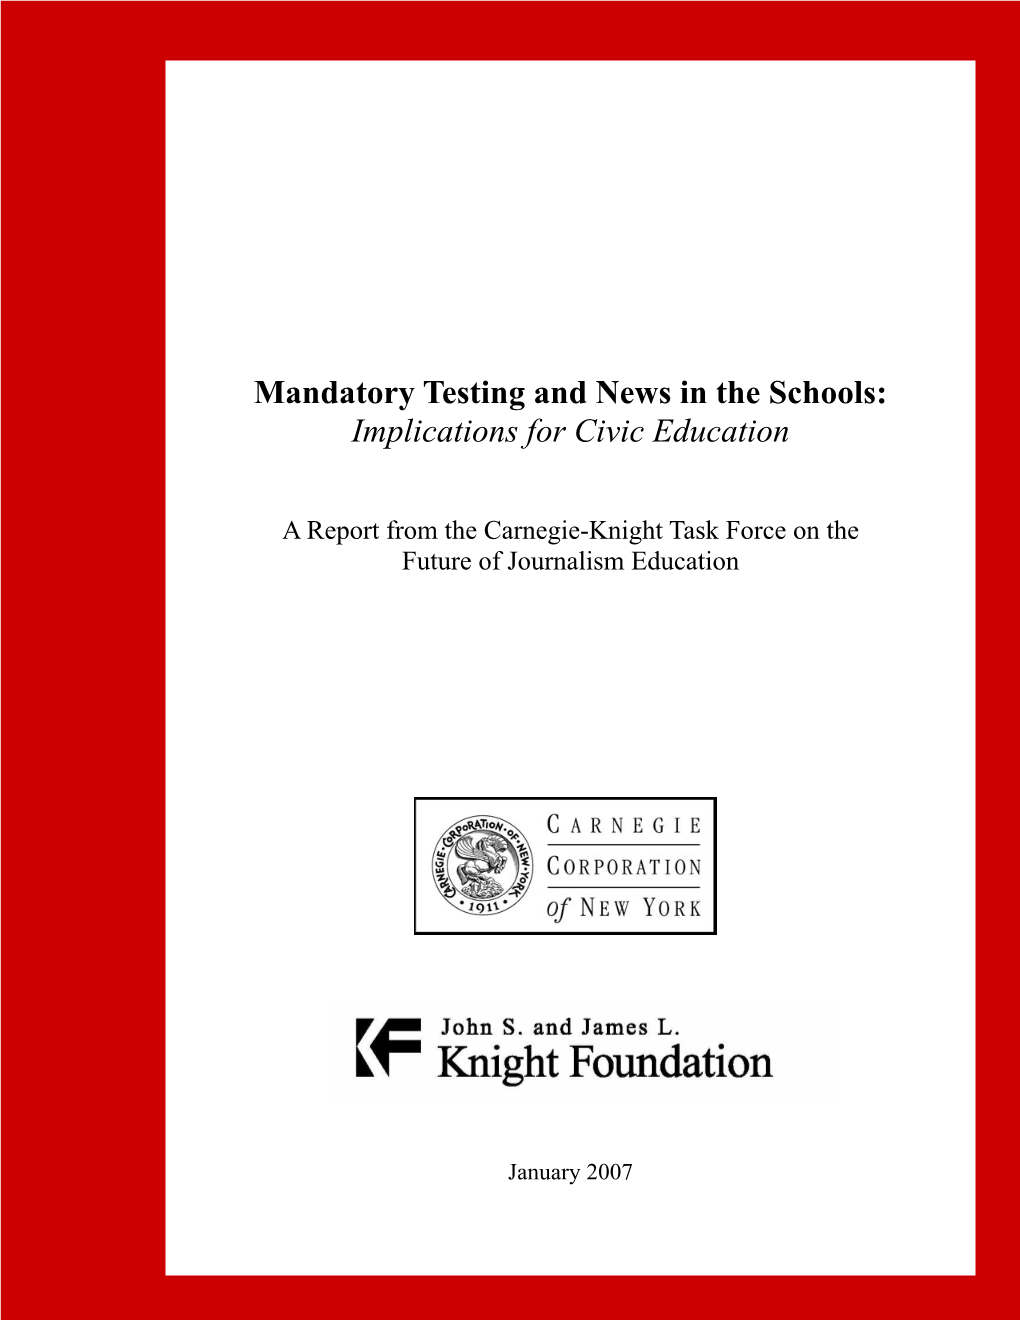 Mandatory Testing and News in the Schools: Implications for Civic Education